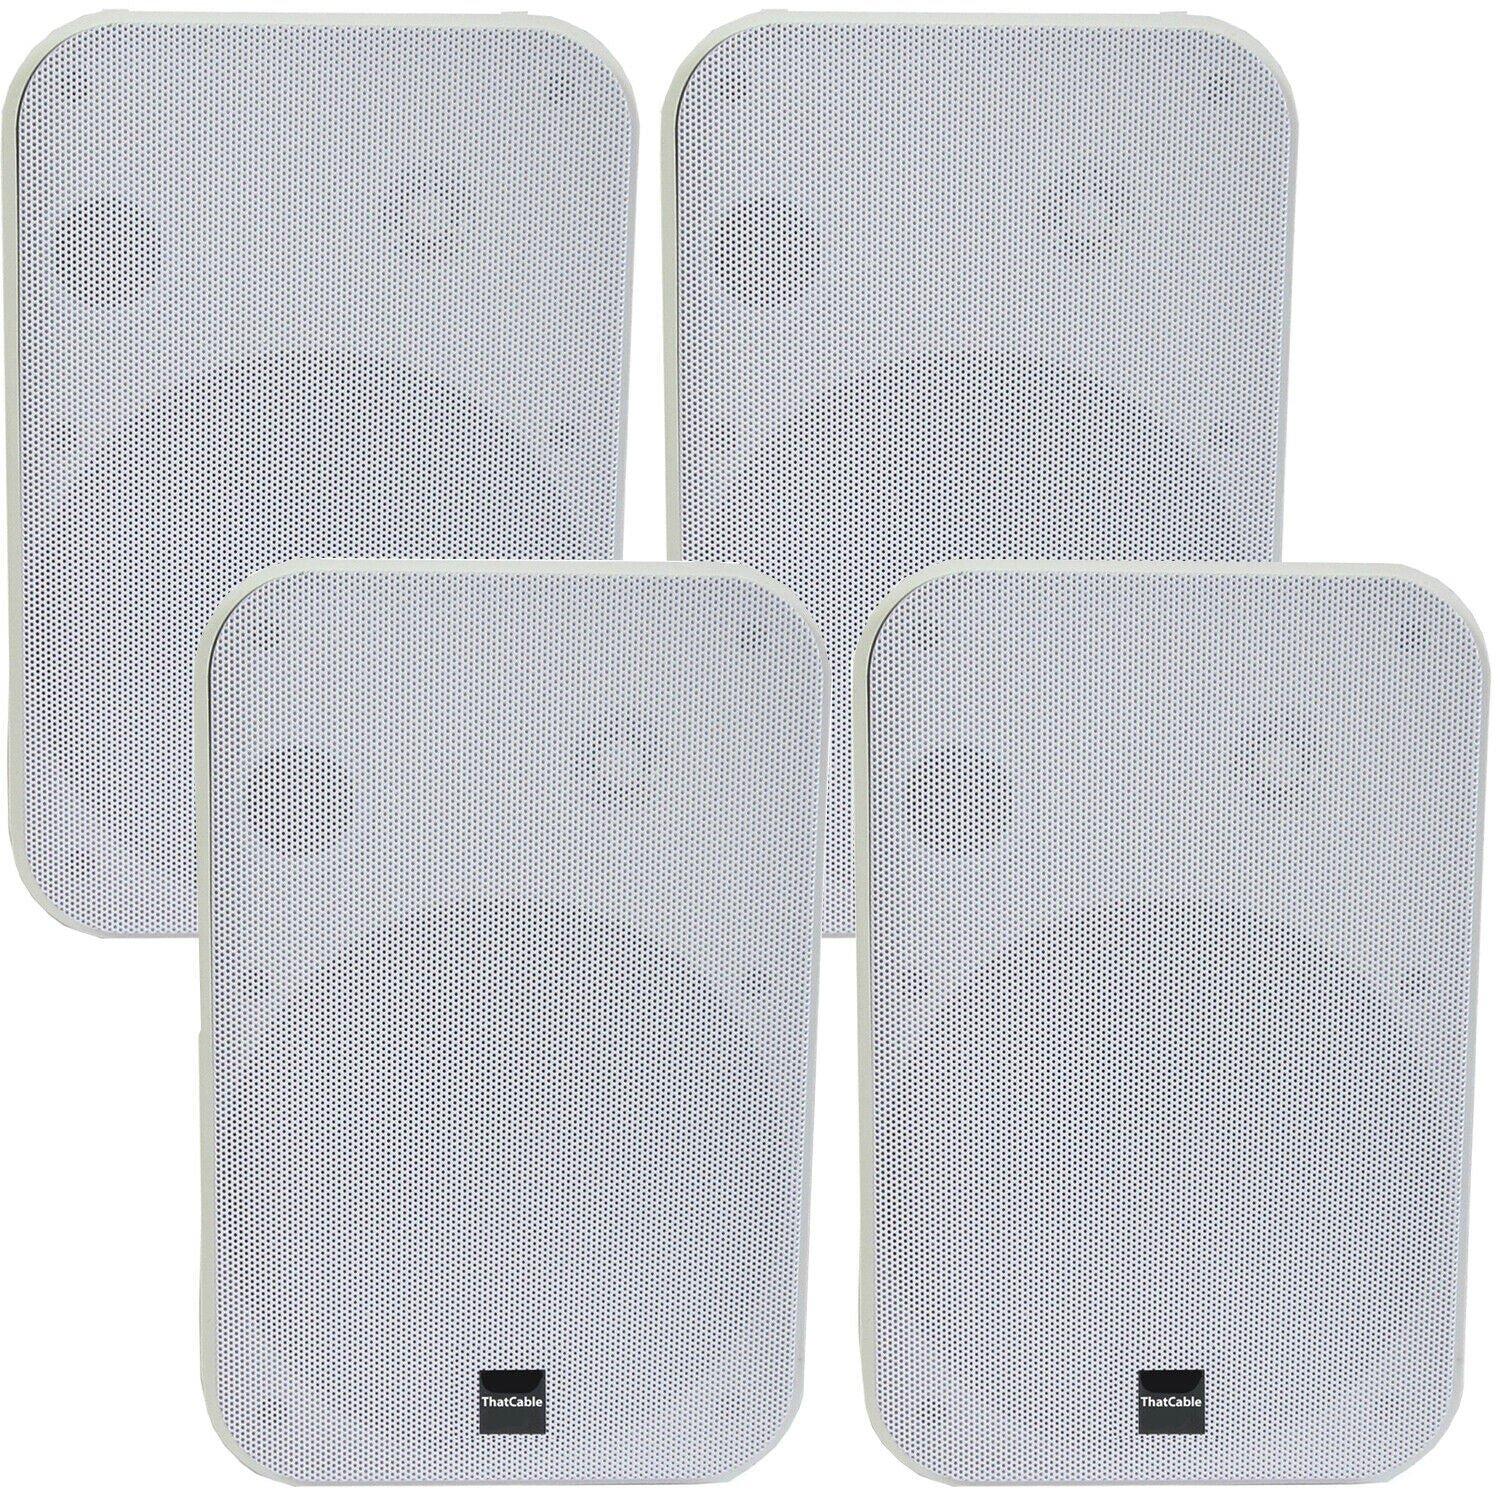 4x 6.5aEUR 200W Moisture Resistant Stereo Loud Speakers 8Ohm White Wall Mounted